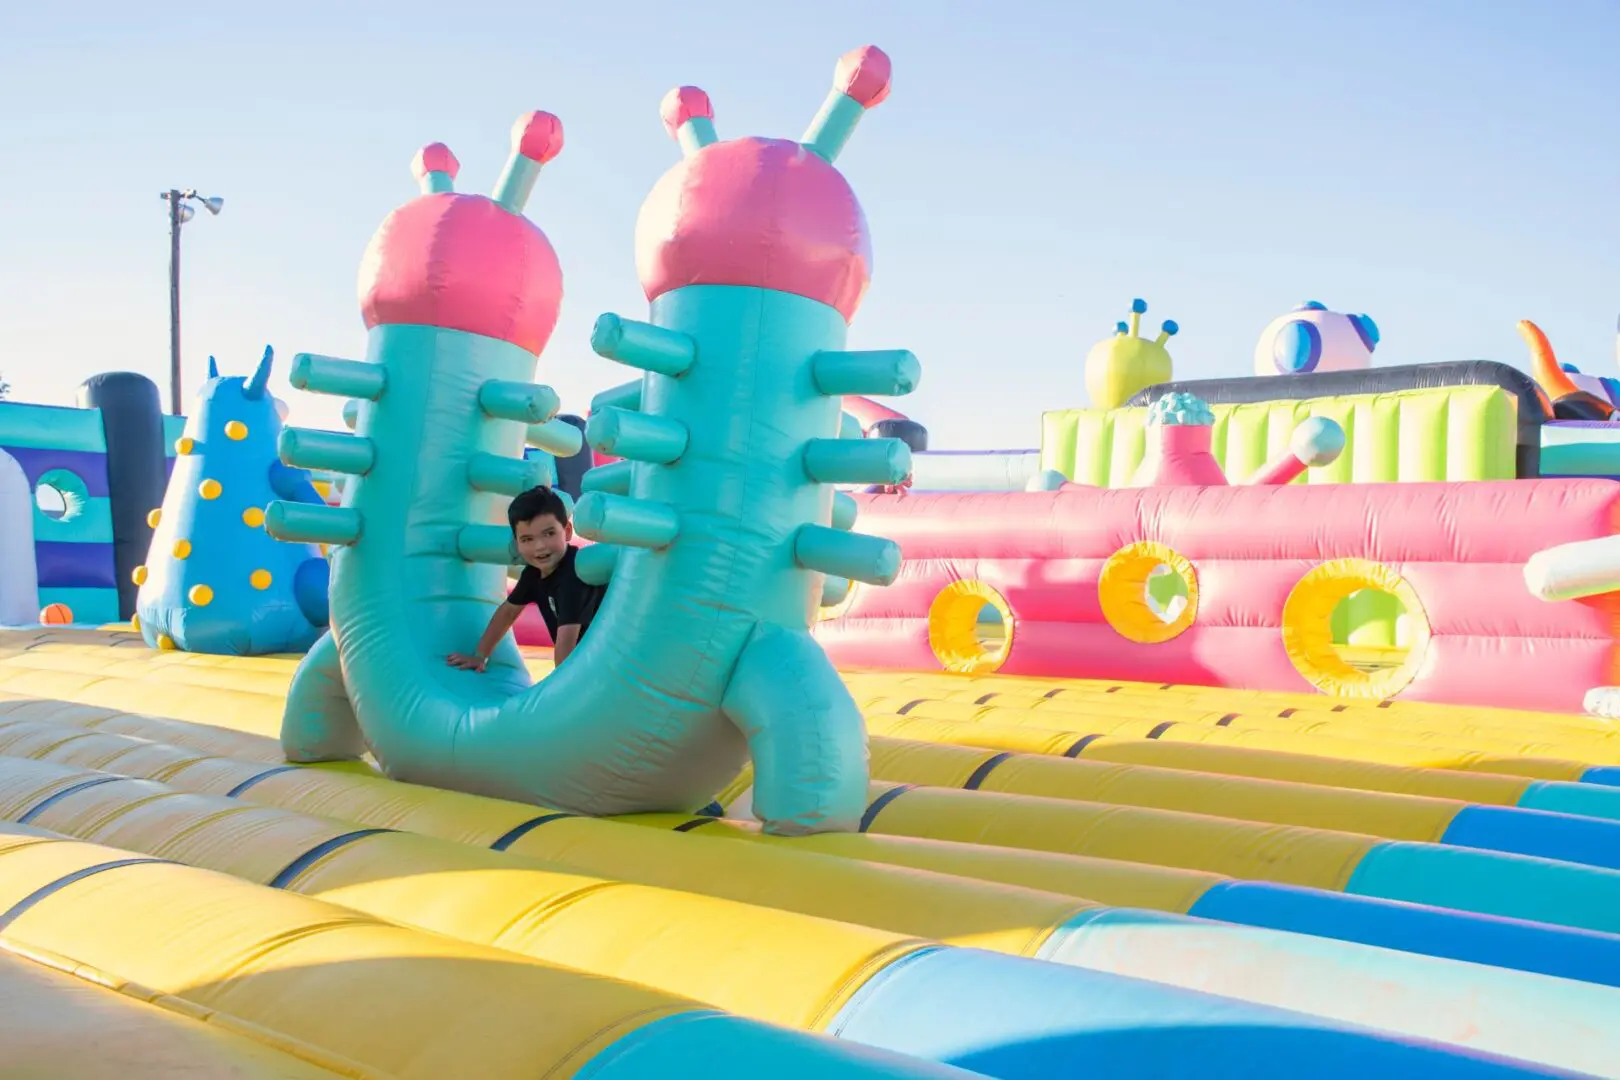 A boy is playing on an inflatable slide.